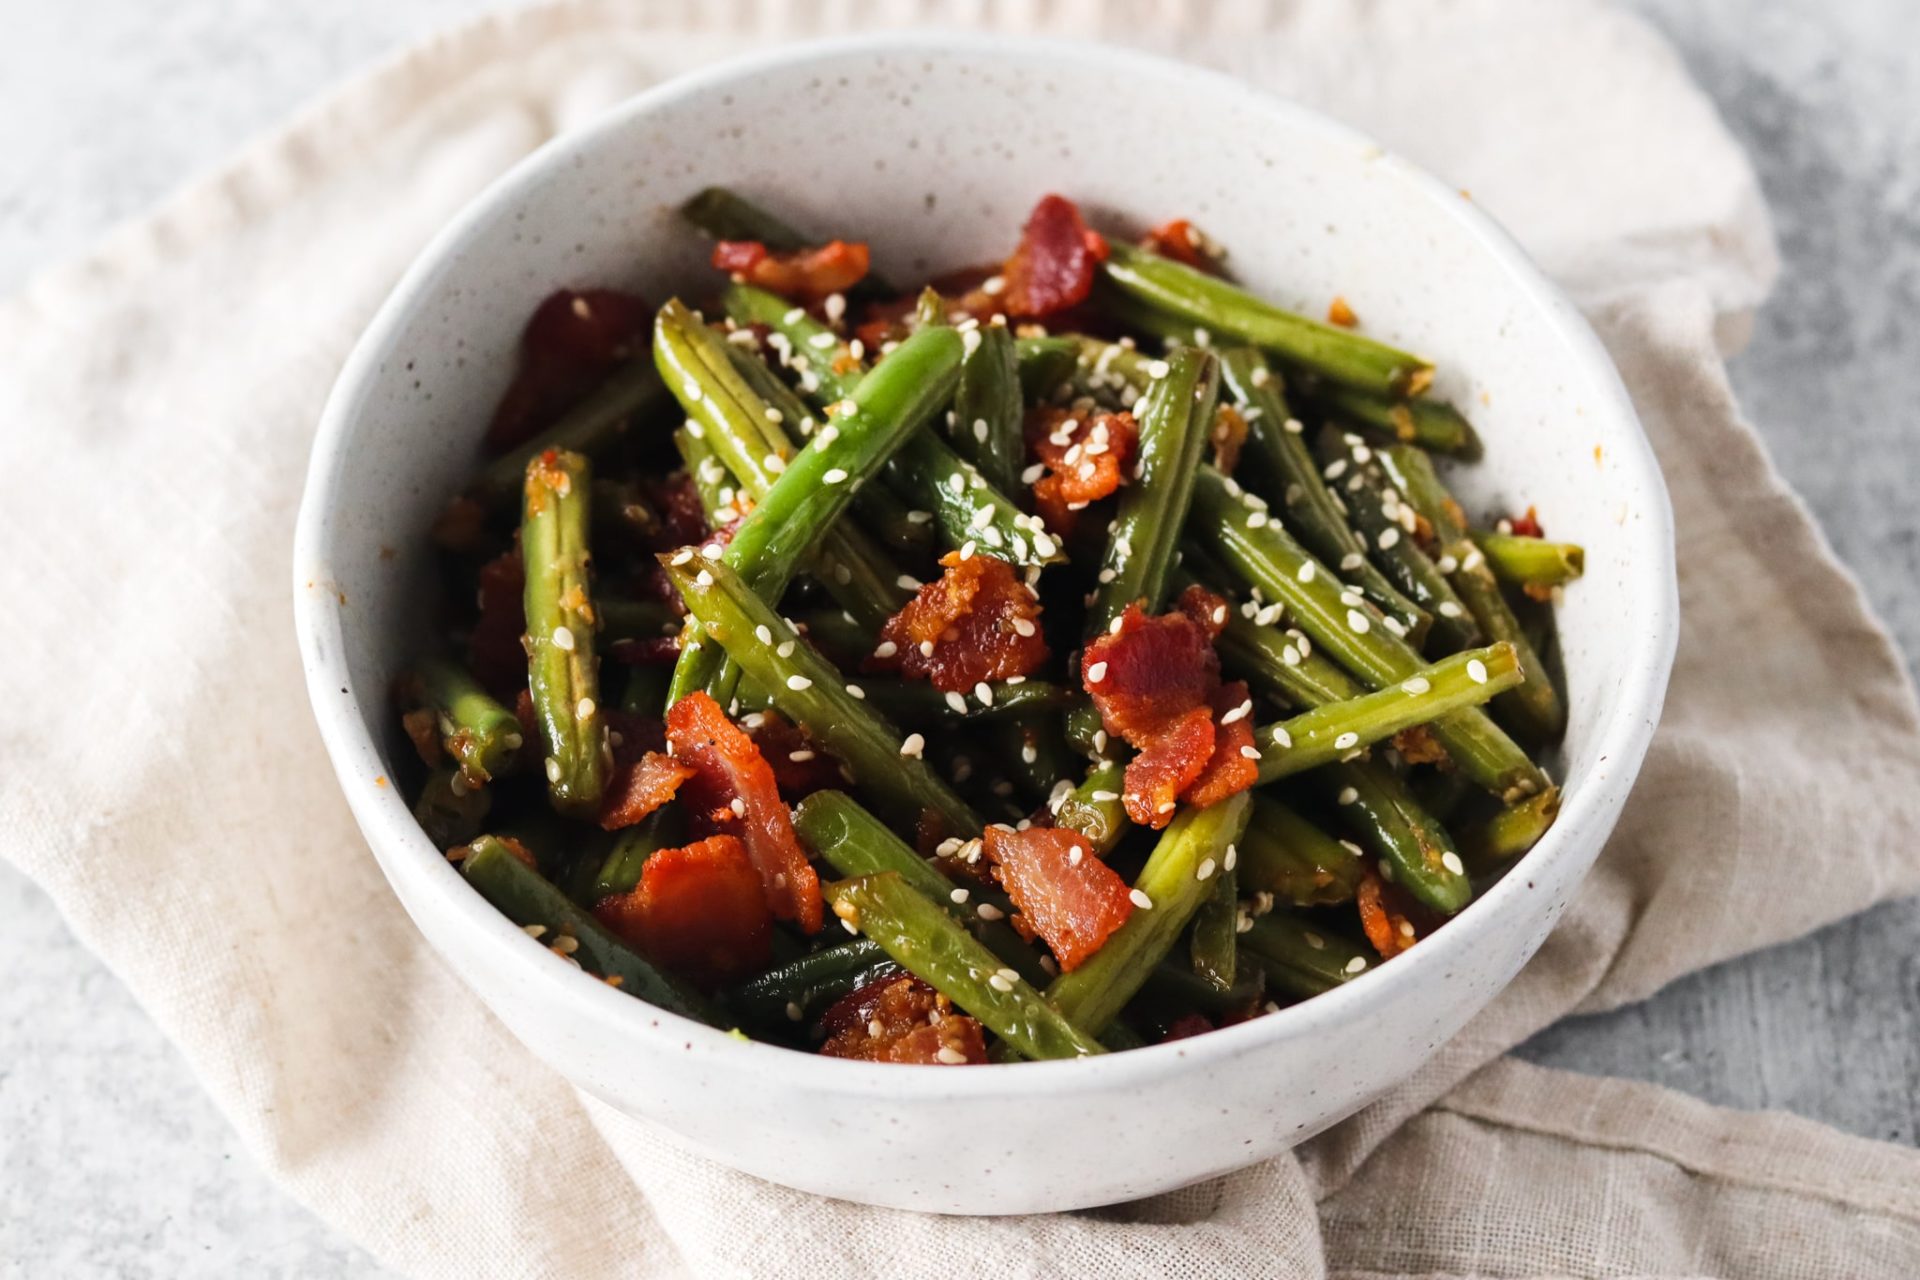 Skillet Green Beans with Bacon - Wholesomelicious